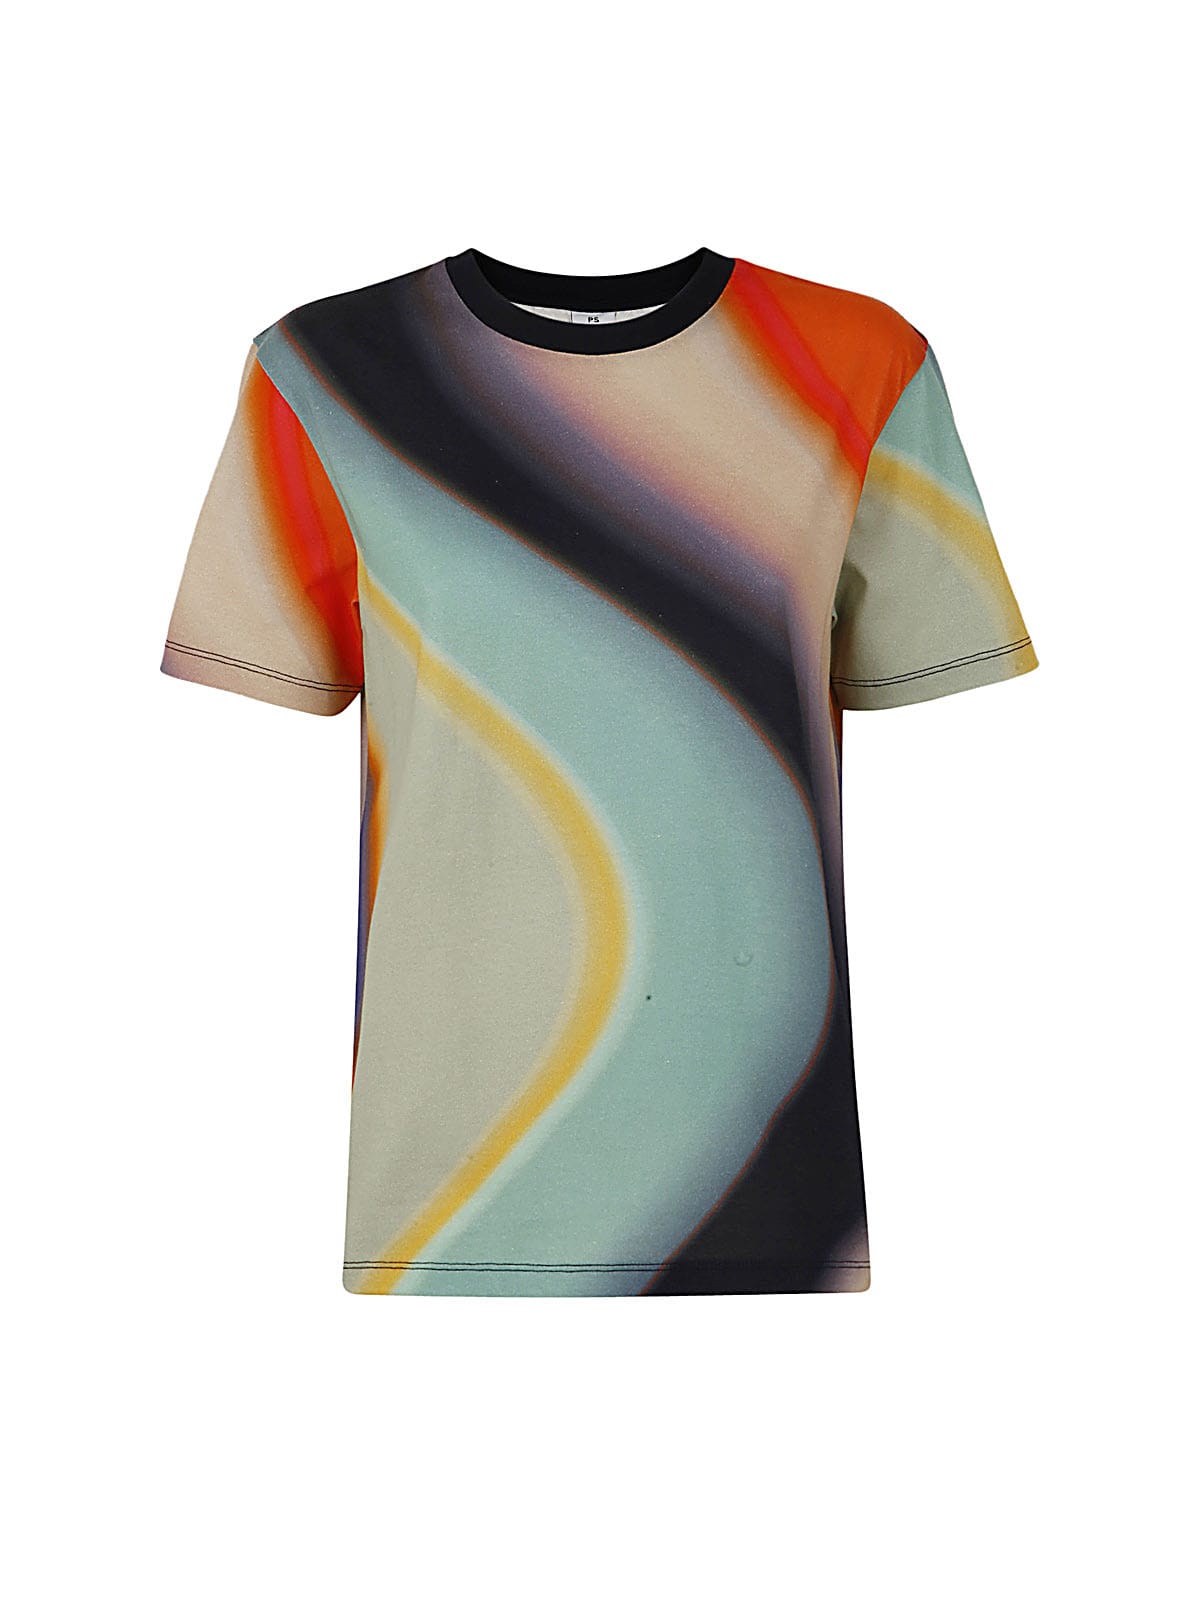 PS by Paul Smith S/s T-shirt